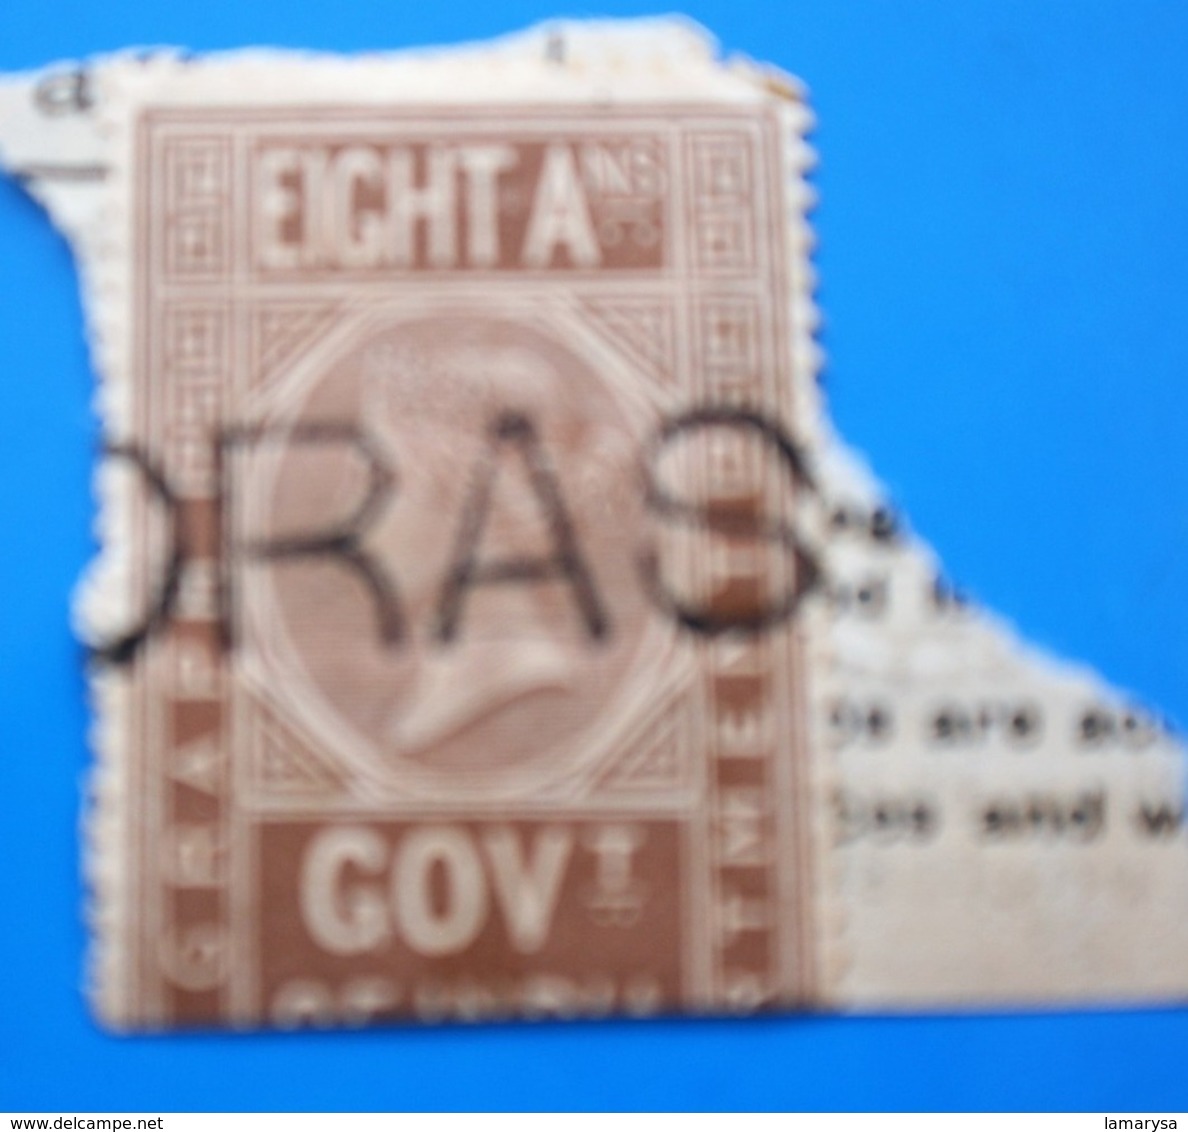 GOVERNEMENT OF INDIA Tax Stamp Service Ex English Colony Cancellation Stamp Of The Consul-Timbre Fiscal Consulat Service - 1854 Britse Indische Compagnie